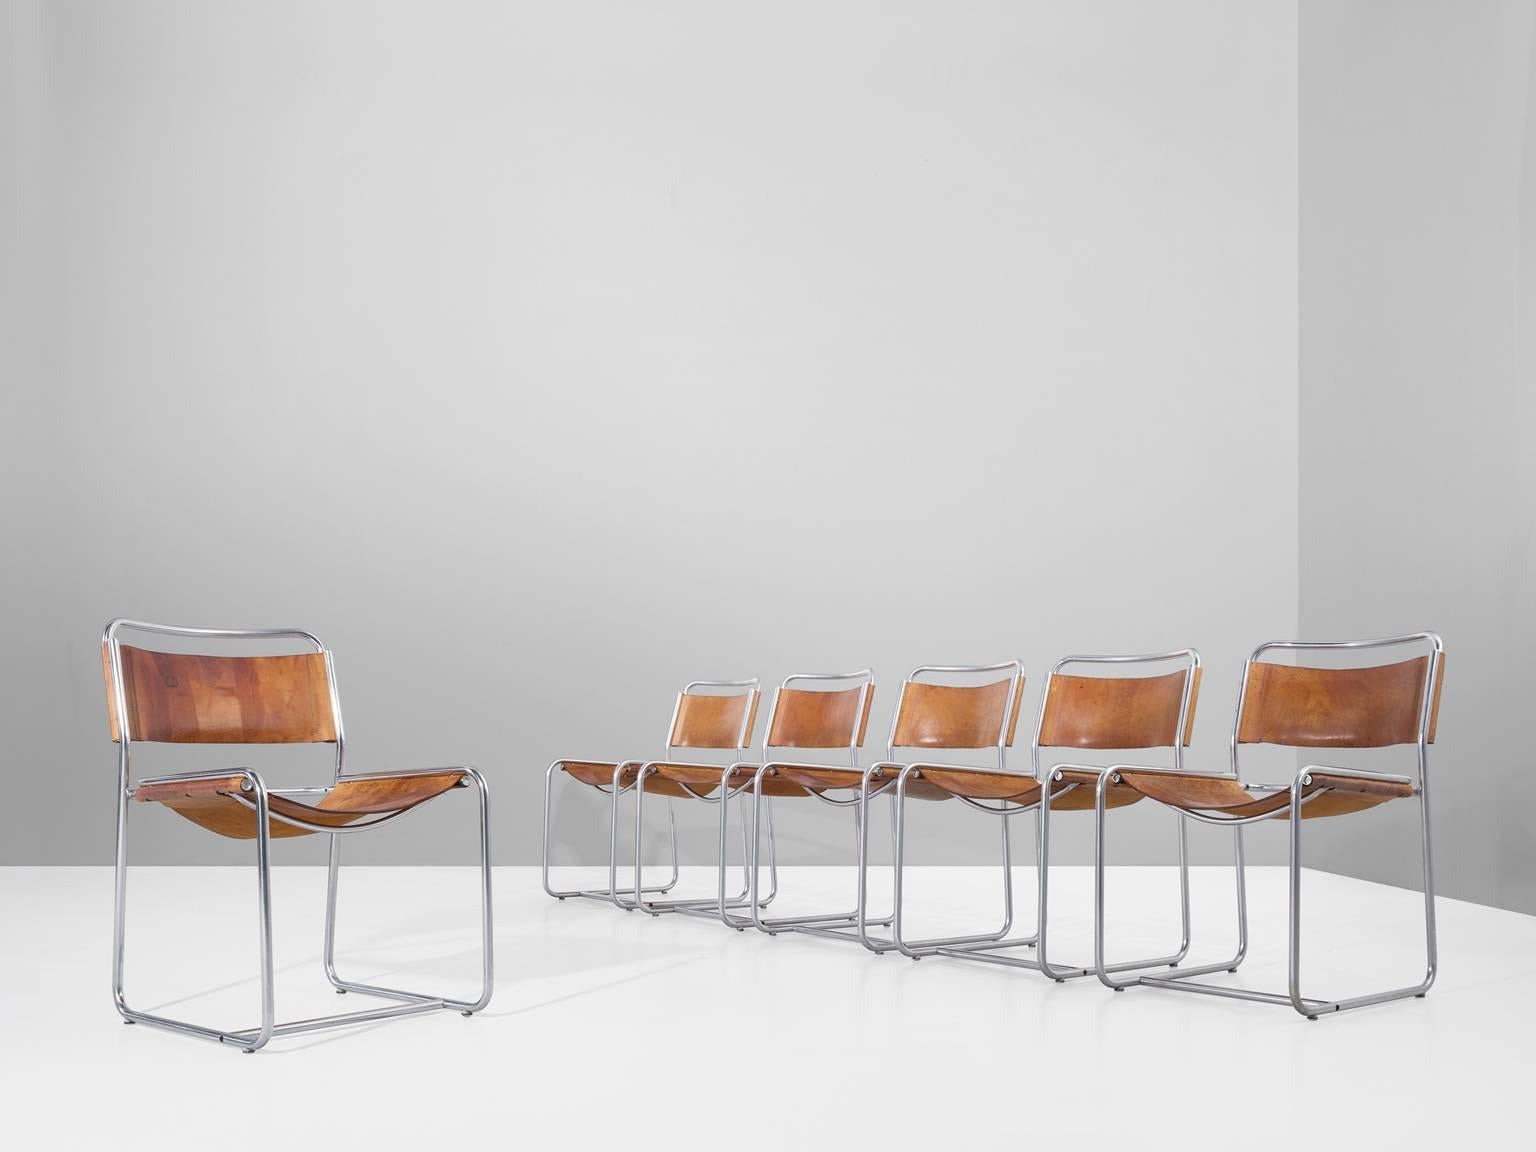 Set of six dining chairs, in metal and leather, by Clair Bataille and Paul Ibens for 't Spectrum, the Netherlands 1971. 

Set of six tubular chairs with natural saddle leather seating and back. The frame consists of thin tubular steel formed into a